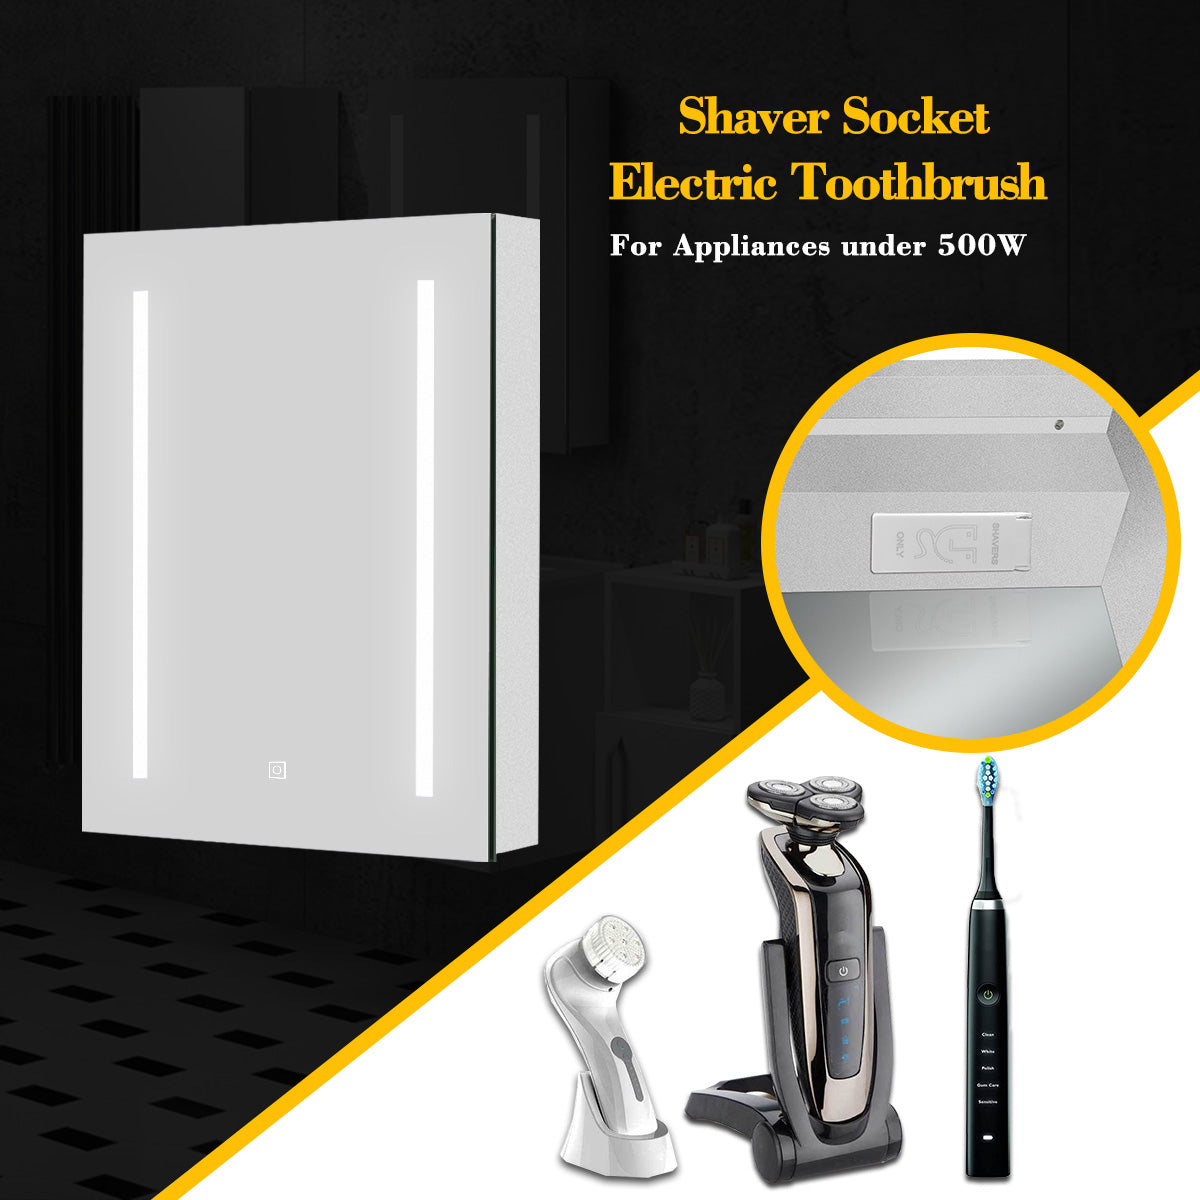 Anti-fog mirror cabinet with shaver socket